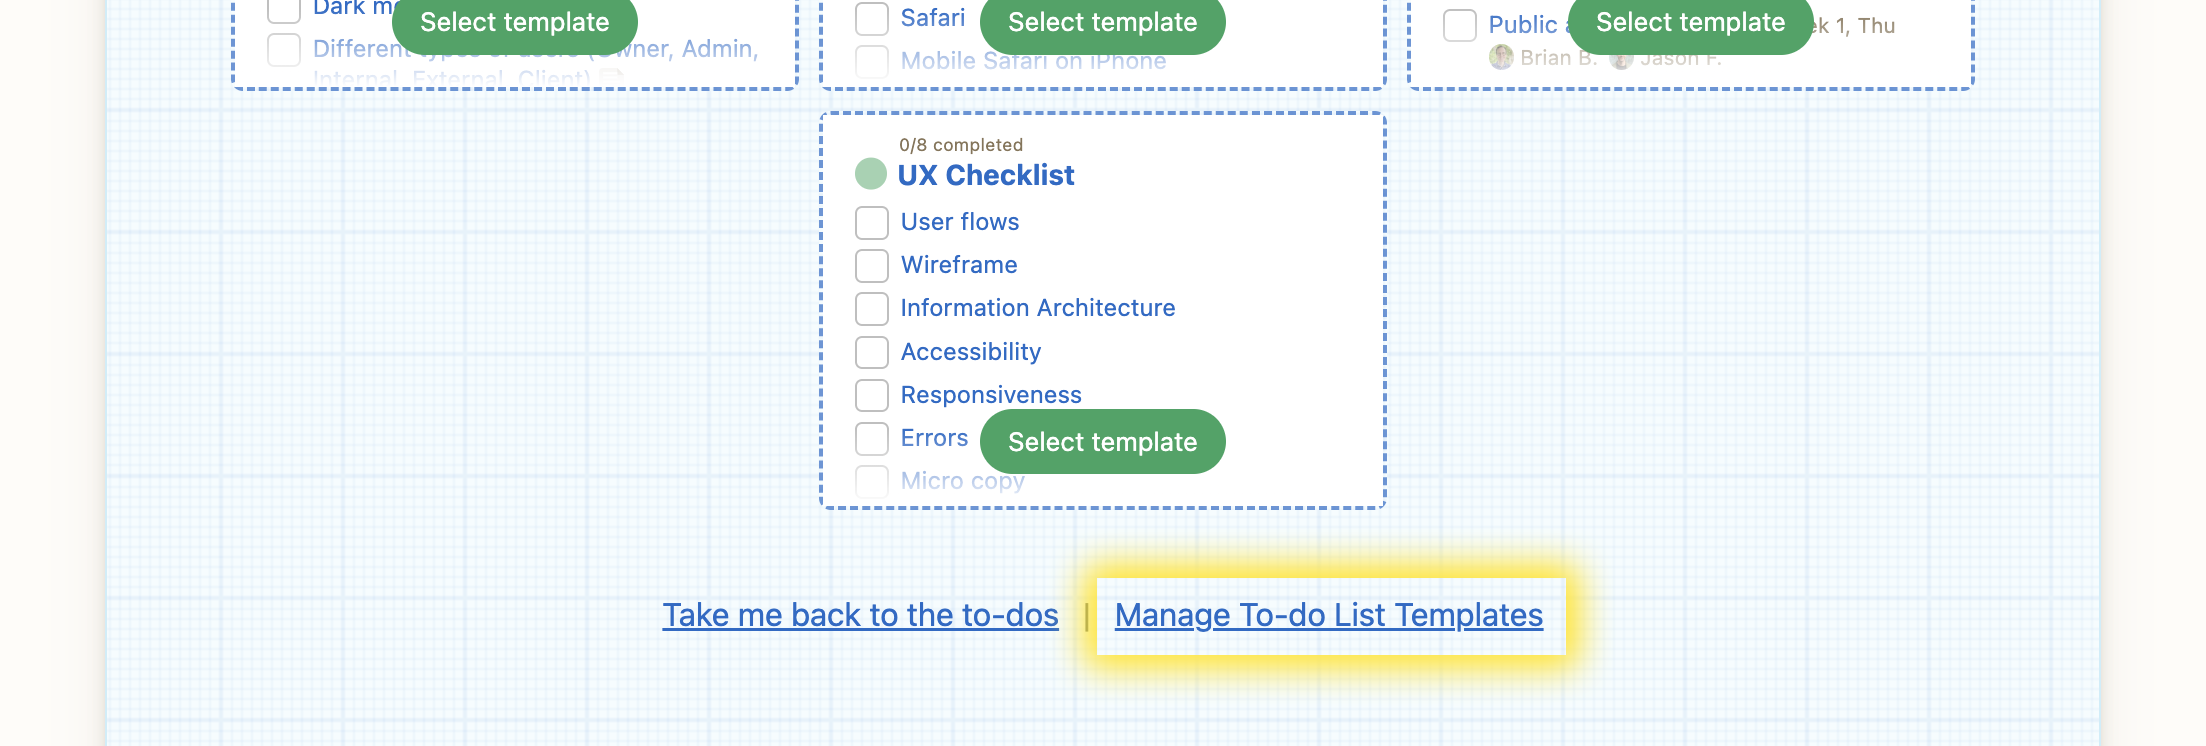 Scroll to the bottom of this page in Basecamp and click the 'Manage To-do List Templates' link to navigate to the necessary page.